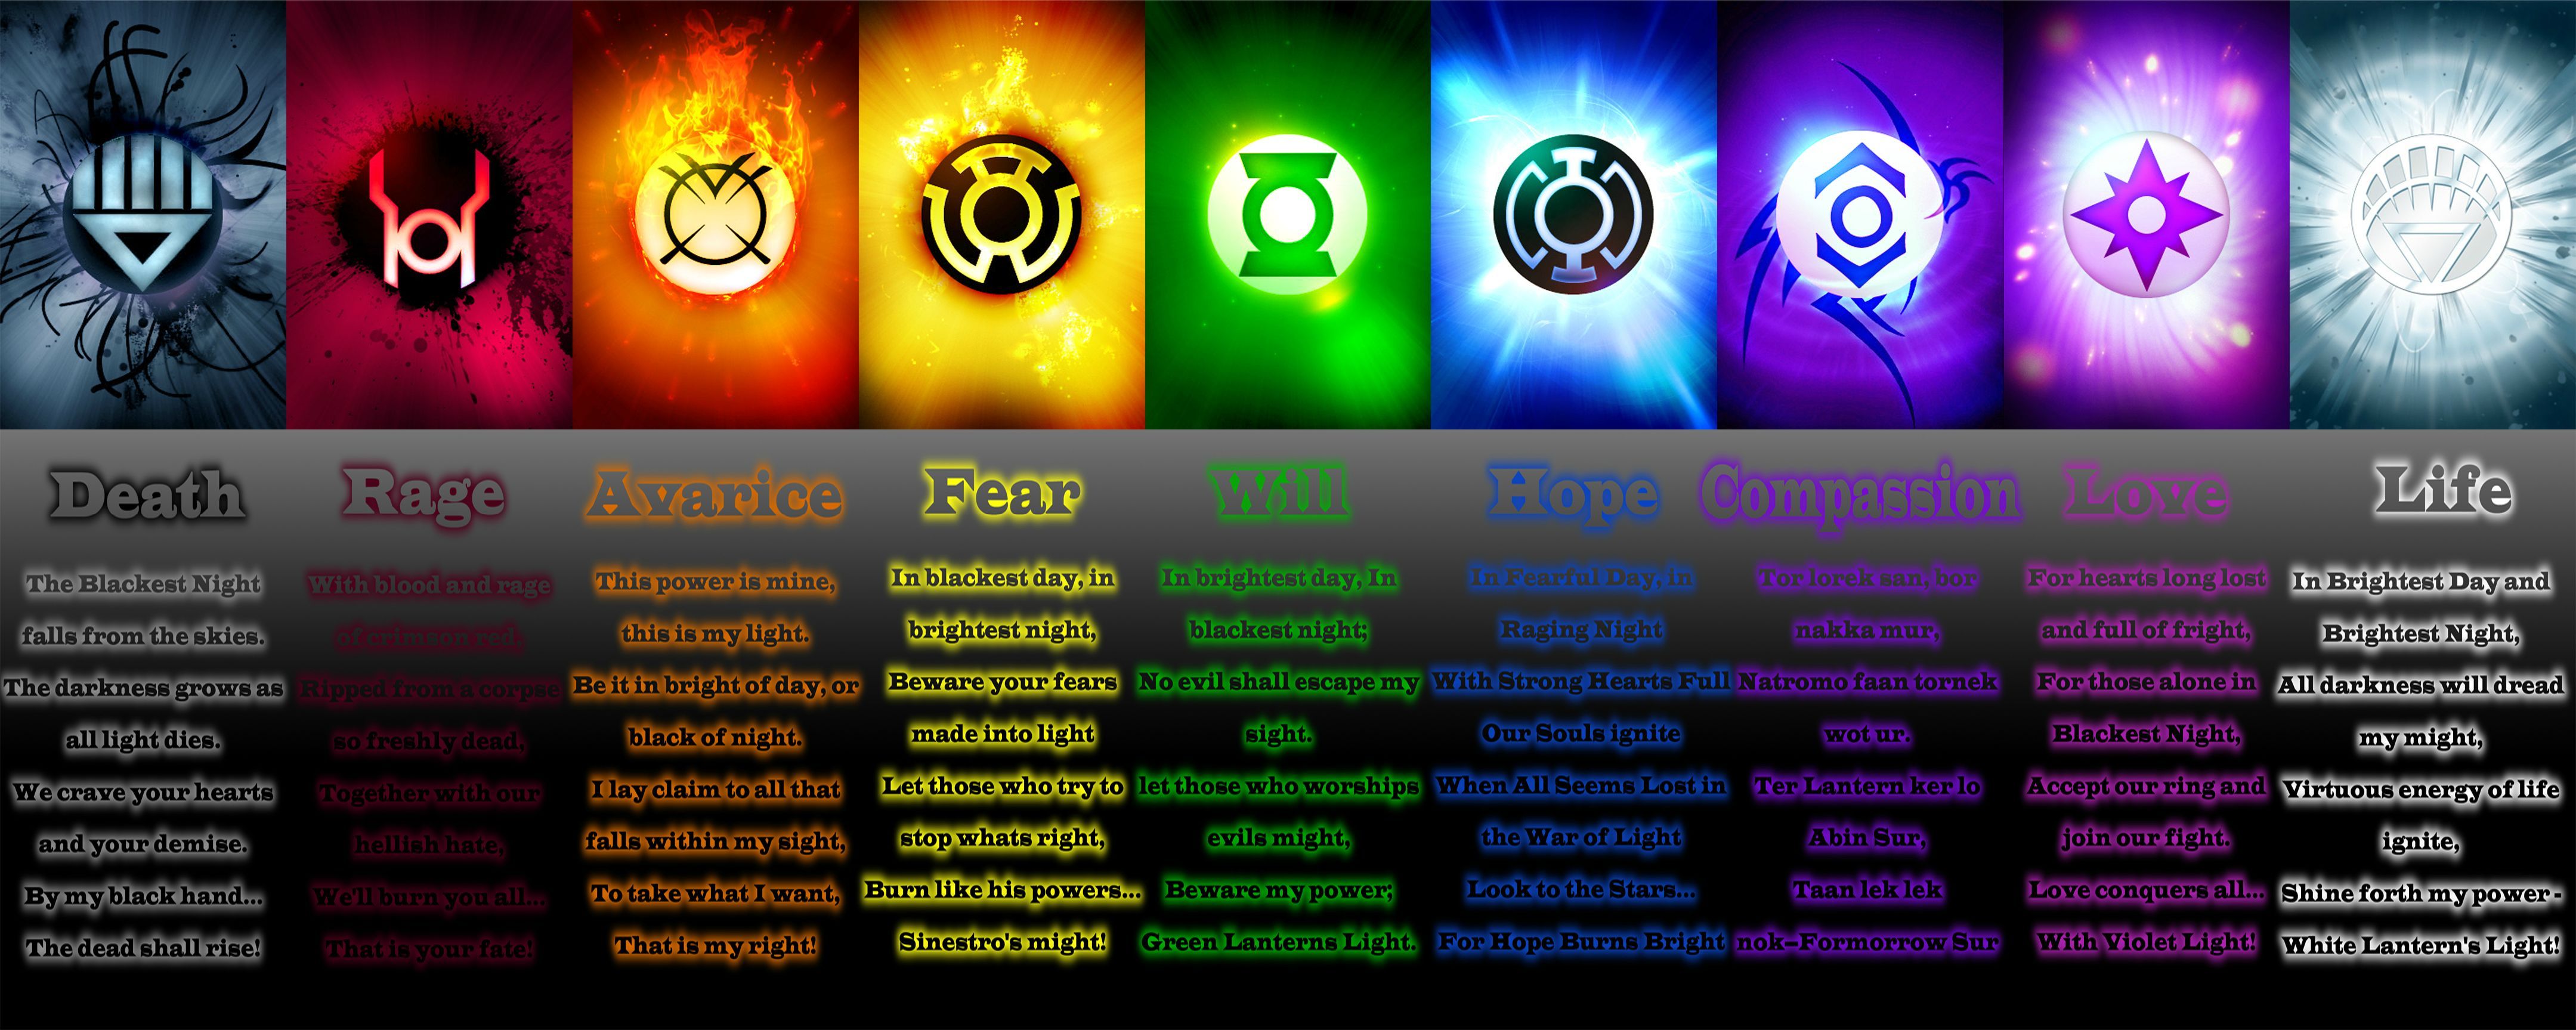 Free download All 9 Lantern Corps Oaths HD Walls Find Wallpaper [4319x1727] for your Desktop, Mobile & Tablet. Explore Lantern Corps Wallpaper. Green Lantern Wallpaper, Green Lantern Logo Wallpaper, Blue Lantern Wallpaper